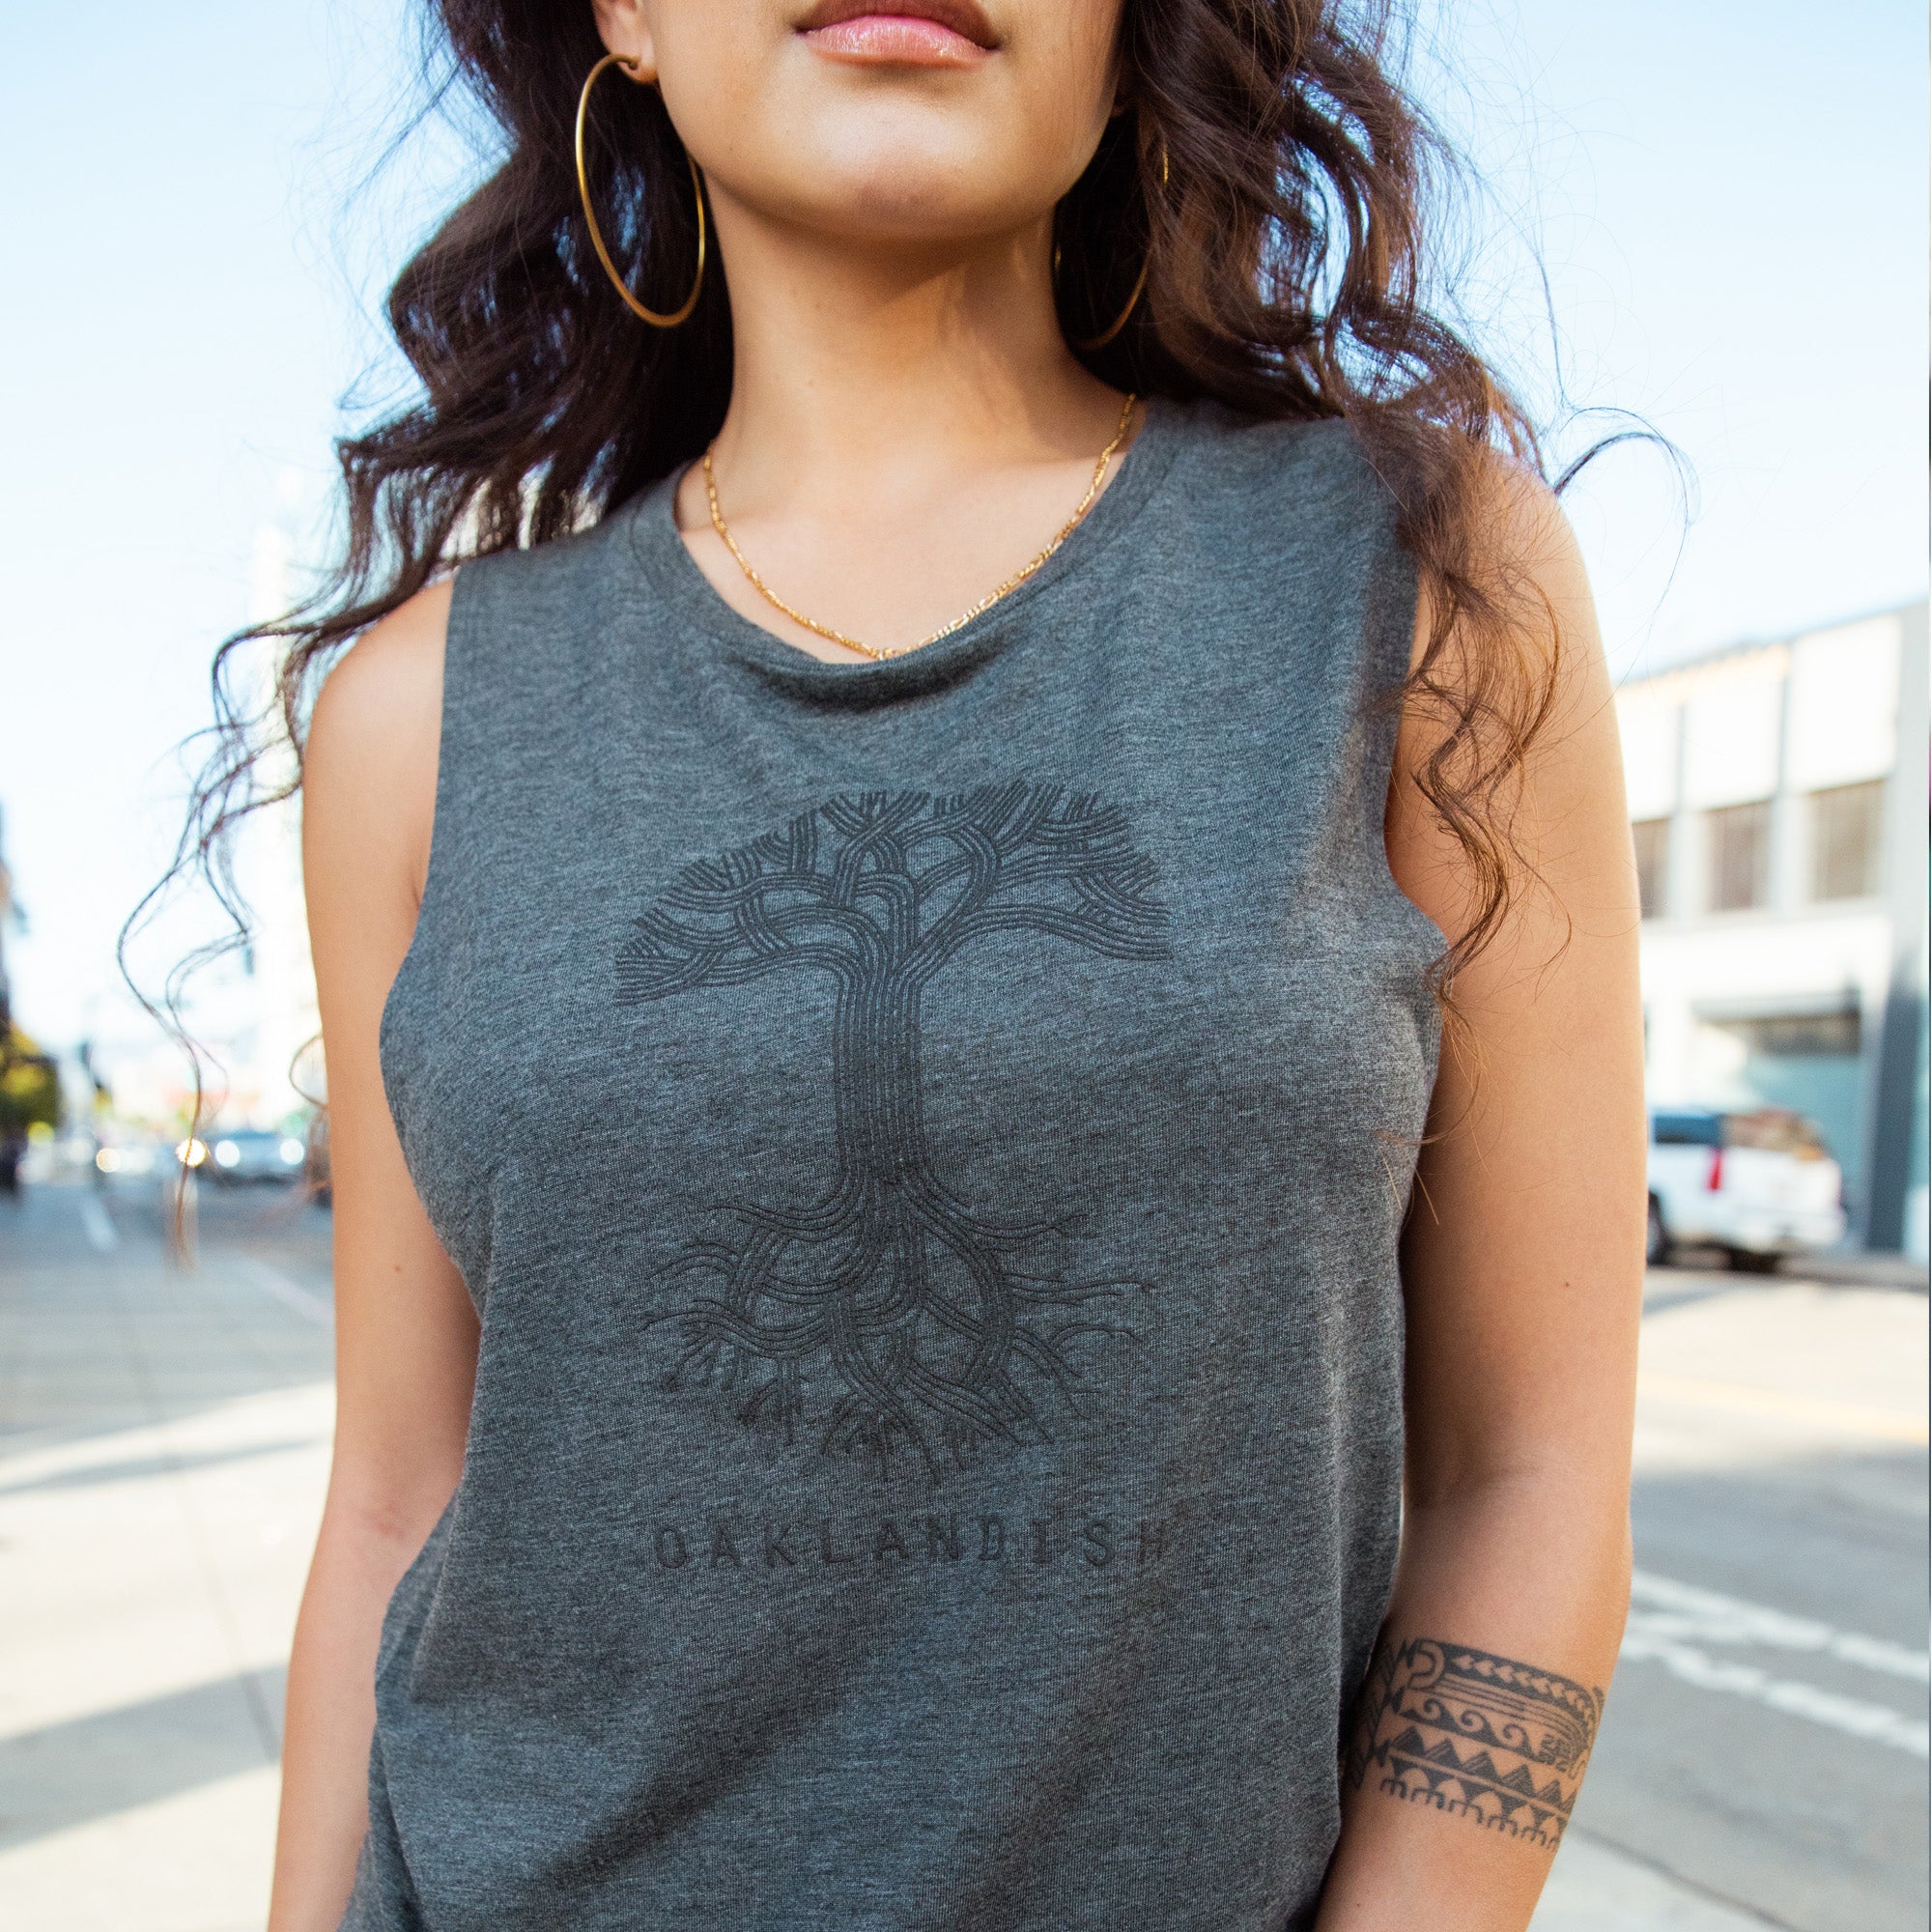 Detail close up of female model wearing Grey women’s cut tank top with black classic Oaklandish tree logo and wordmark on chest.